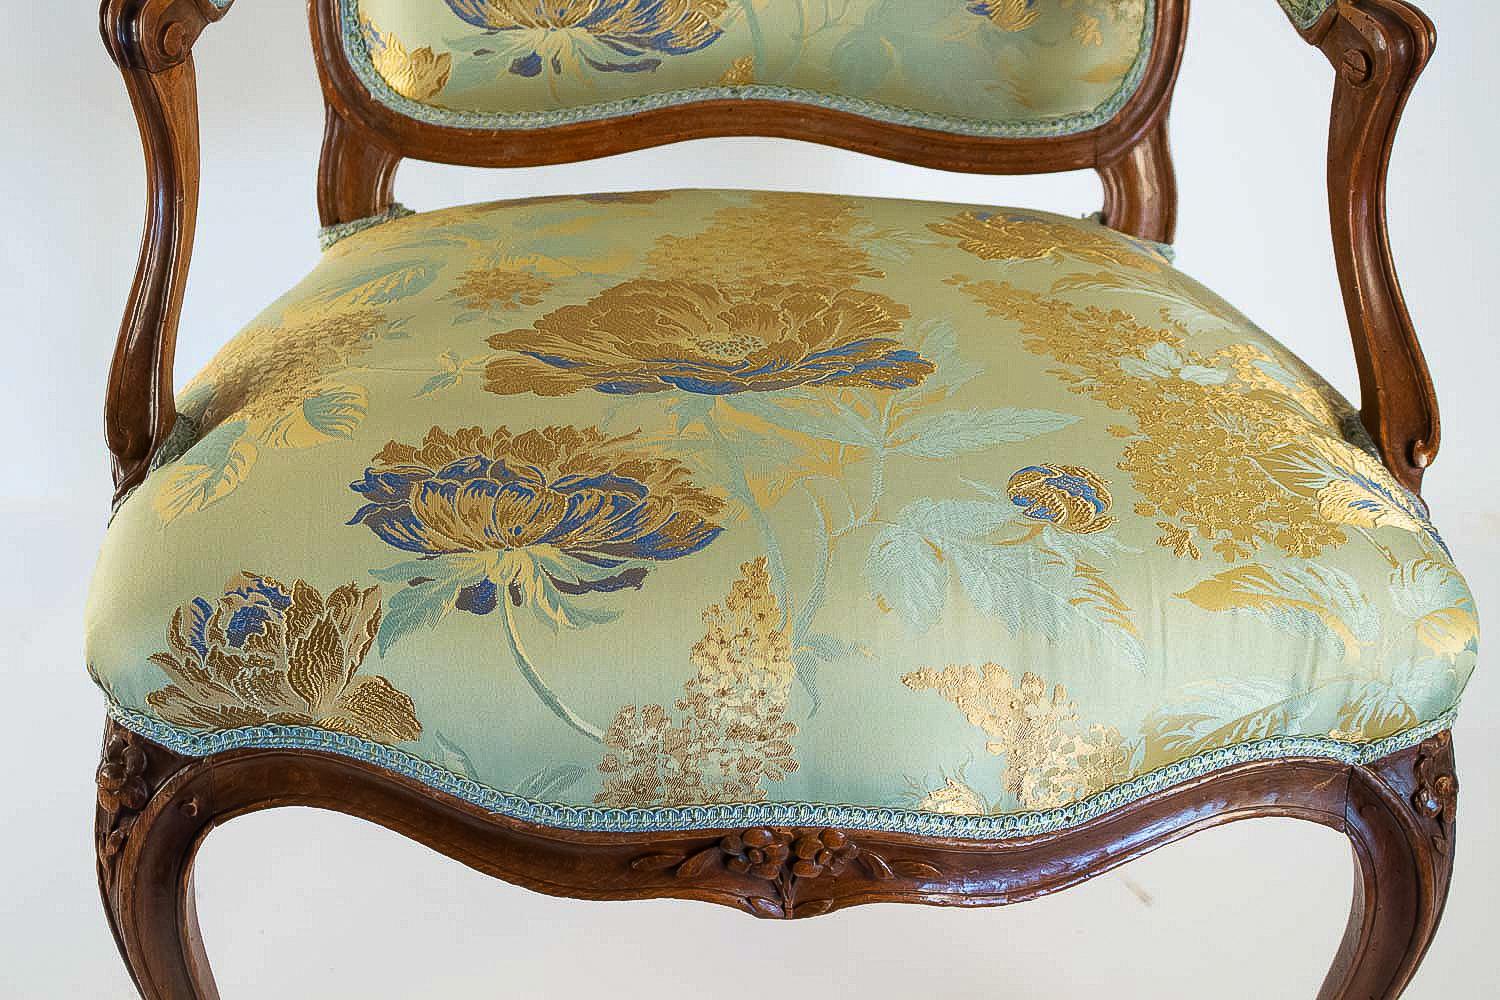 Wood Stamped by Louis Delanois Louis XV Period Pair of Large Armchairs, circa 1765